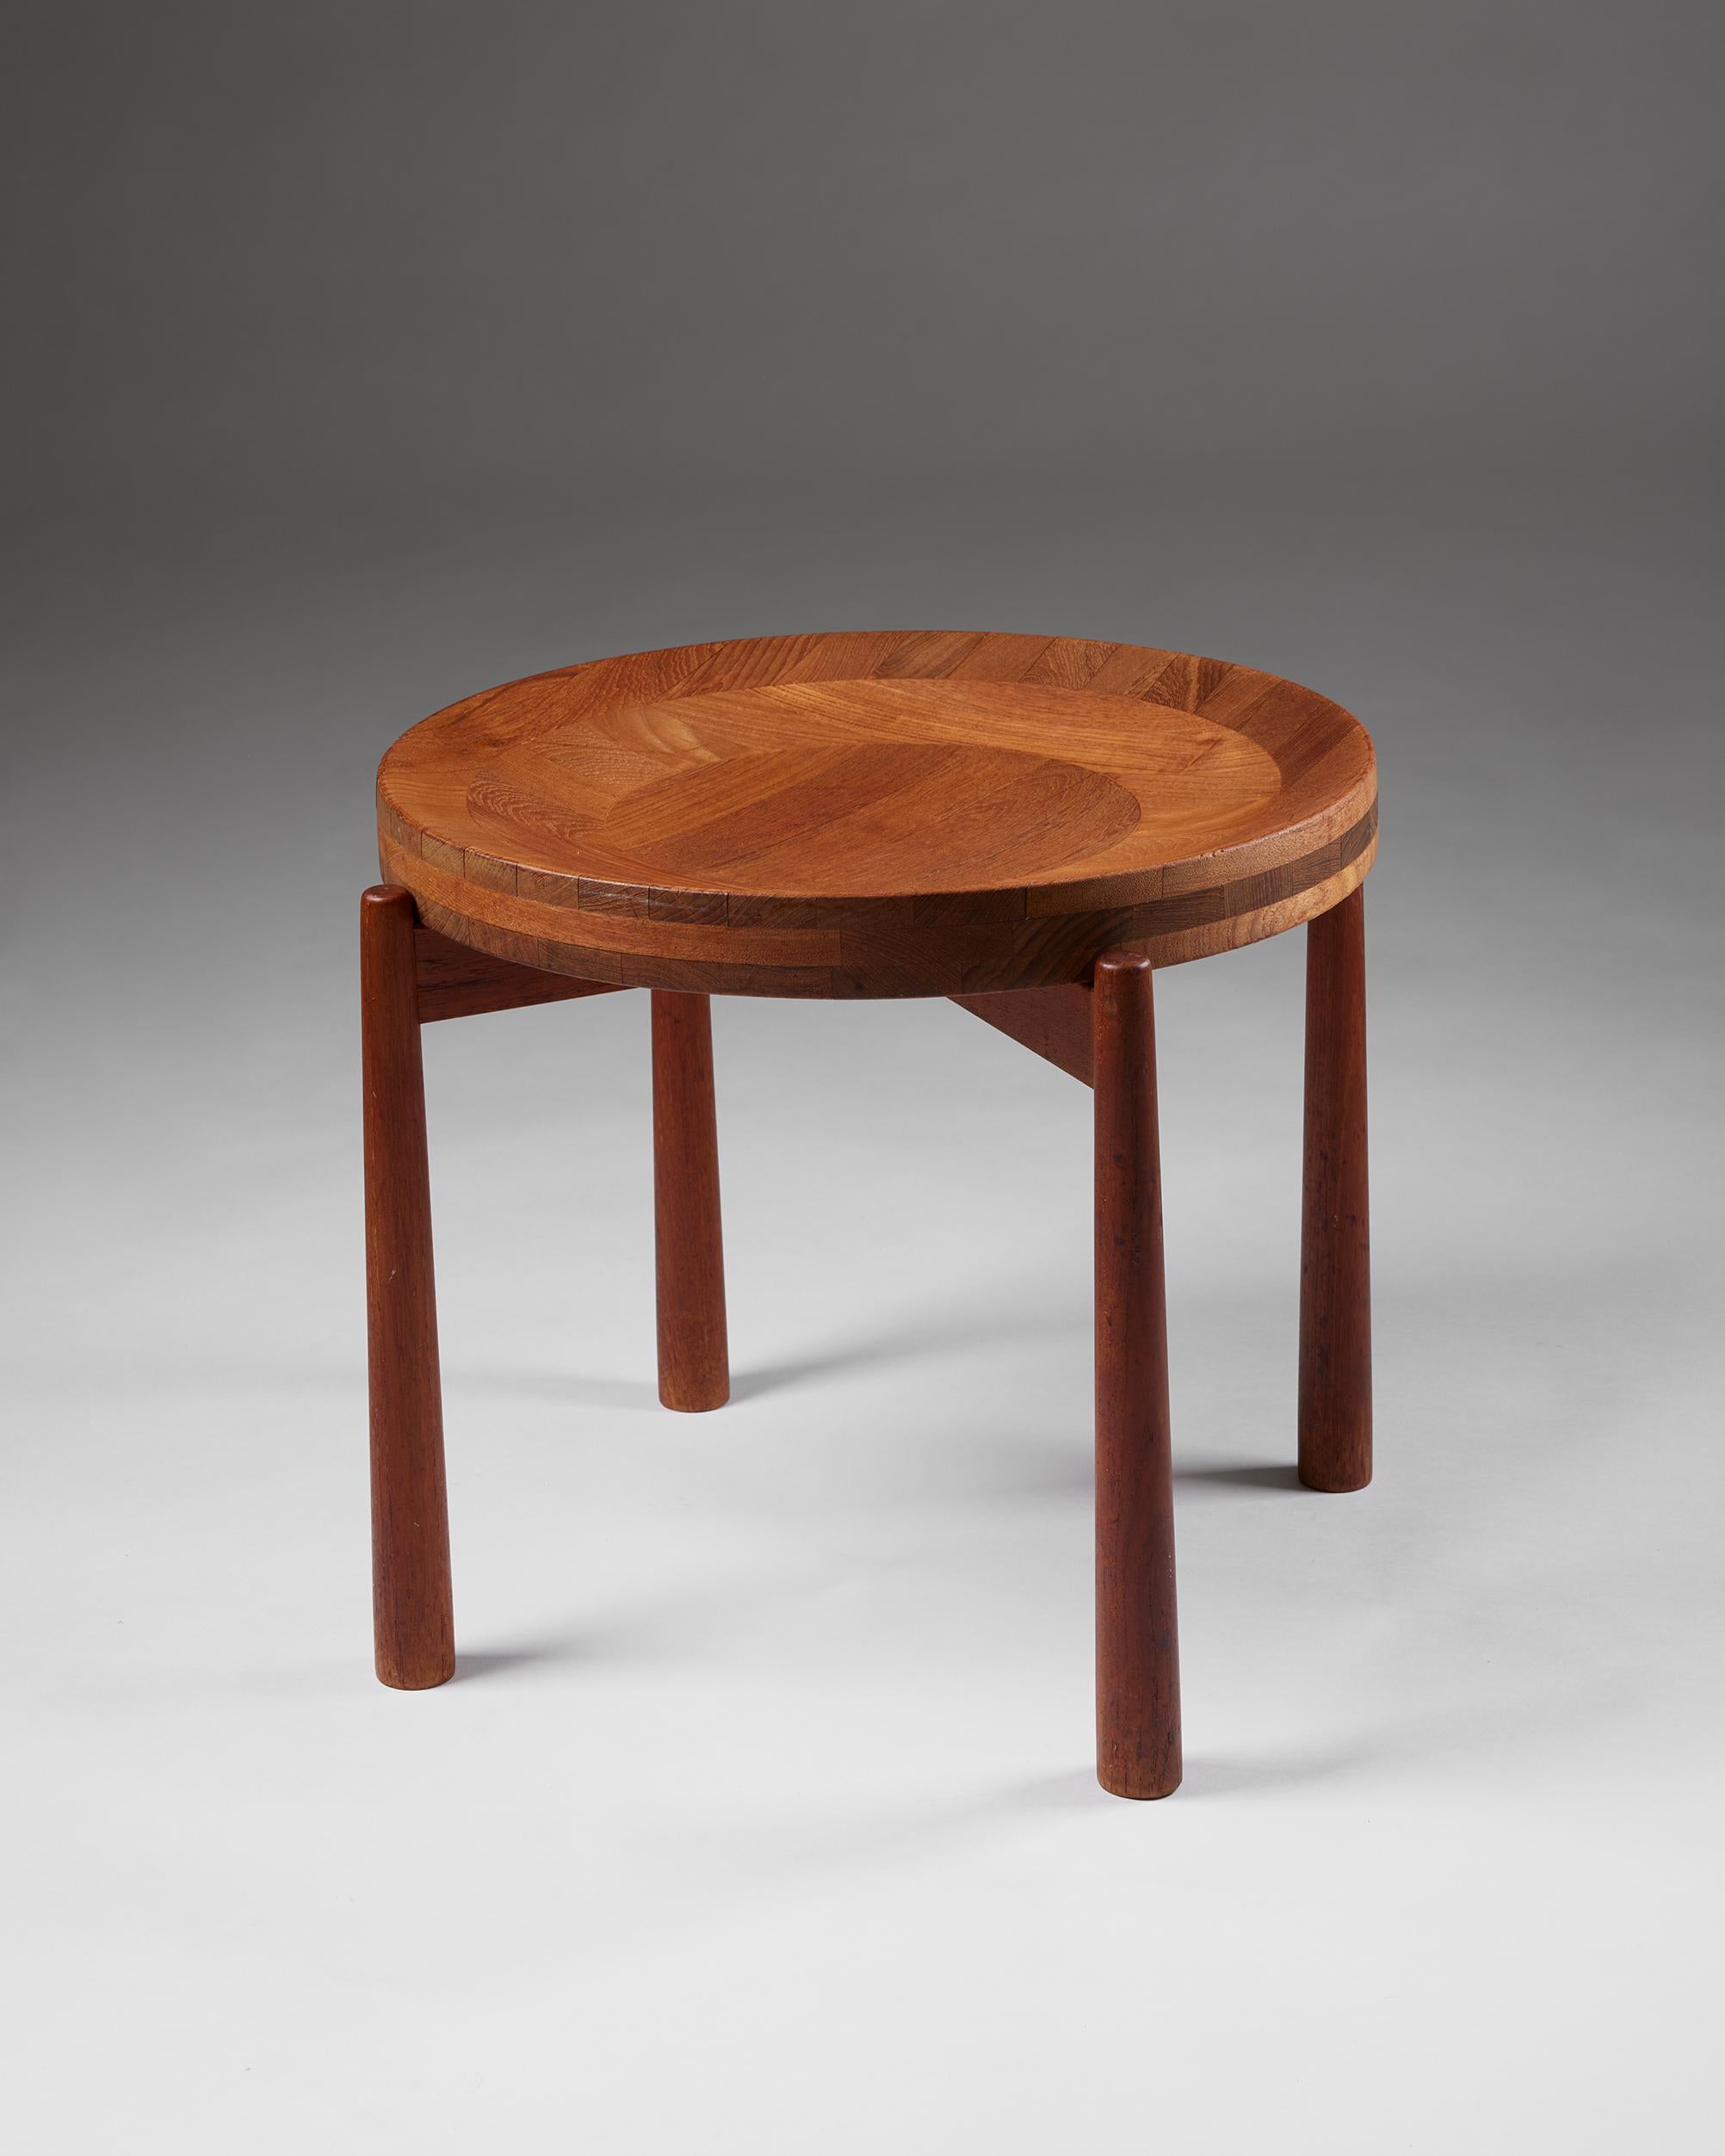 Side table designed by Jens Quistgaard,
Denmark, 1950s

Teak.

Exquisite woodwork and a beautifully shaped, removable tray surface that can function as a bowl characterise this Danish collectable. The sculptor Jens Harald Quistgaard worked with